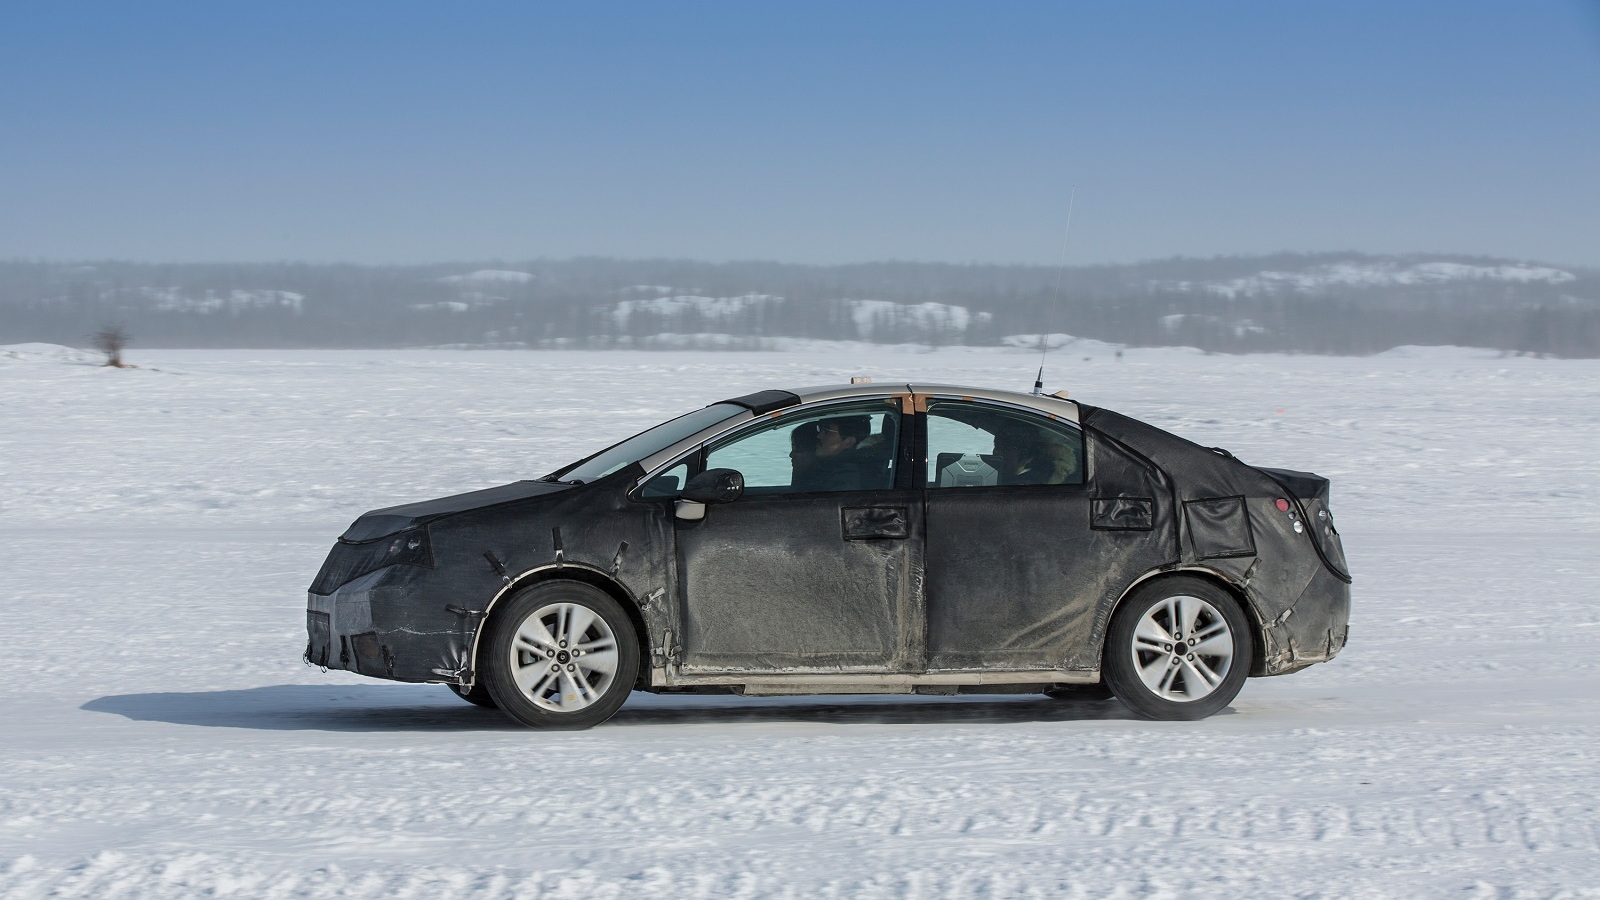 Toyota FCV hydrogen fuel cell vehicle prototype during cold-weather endurance testing in N America